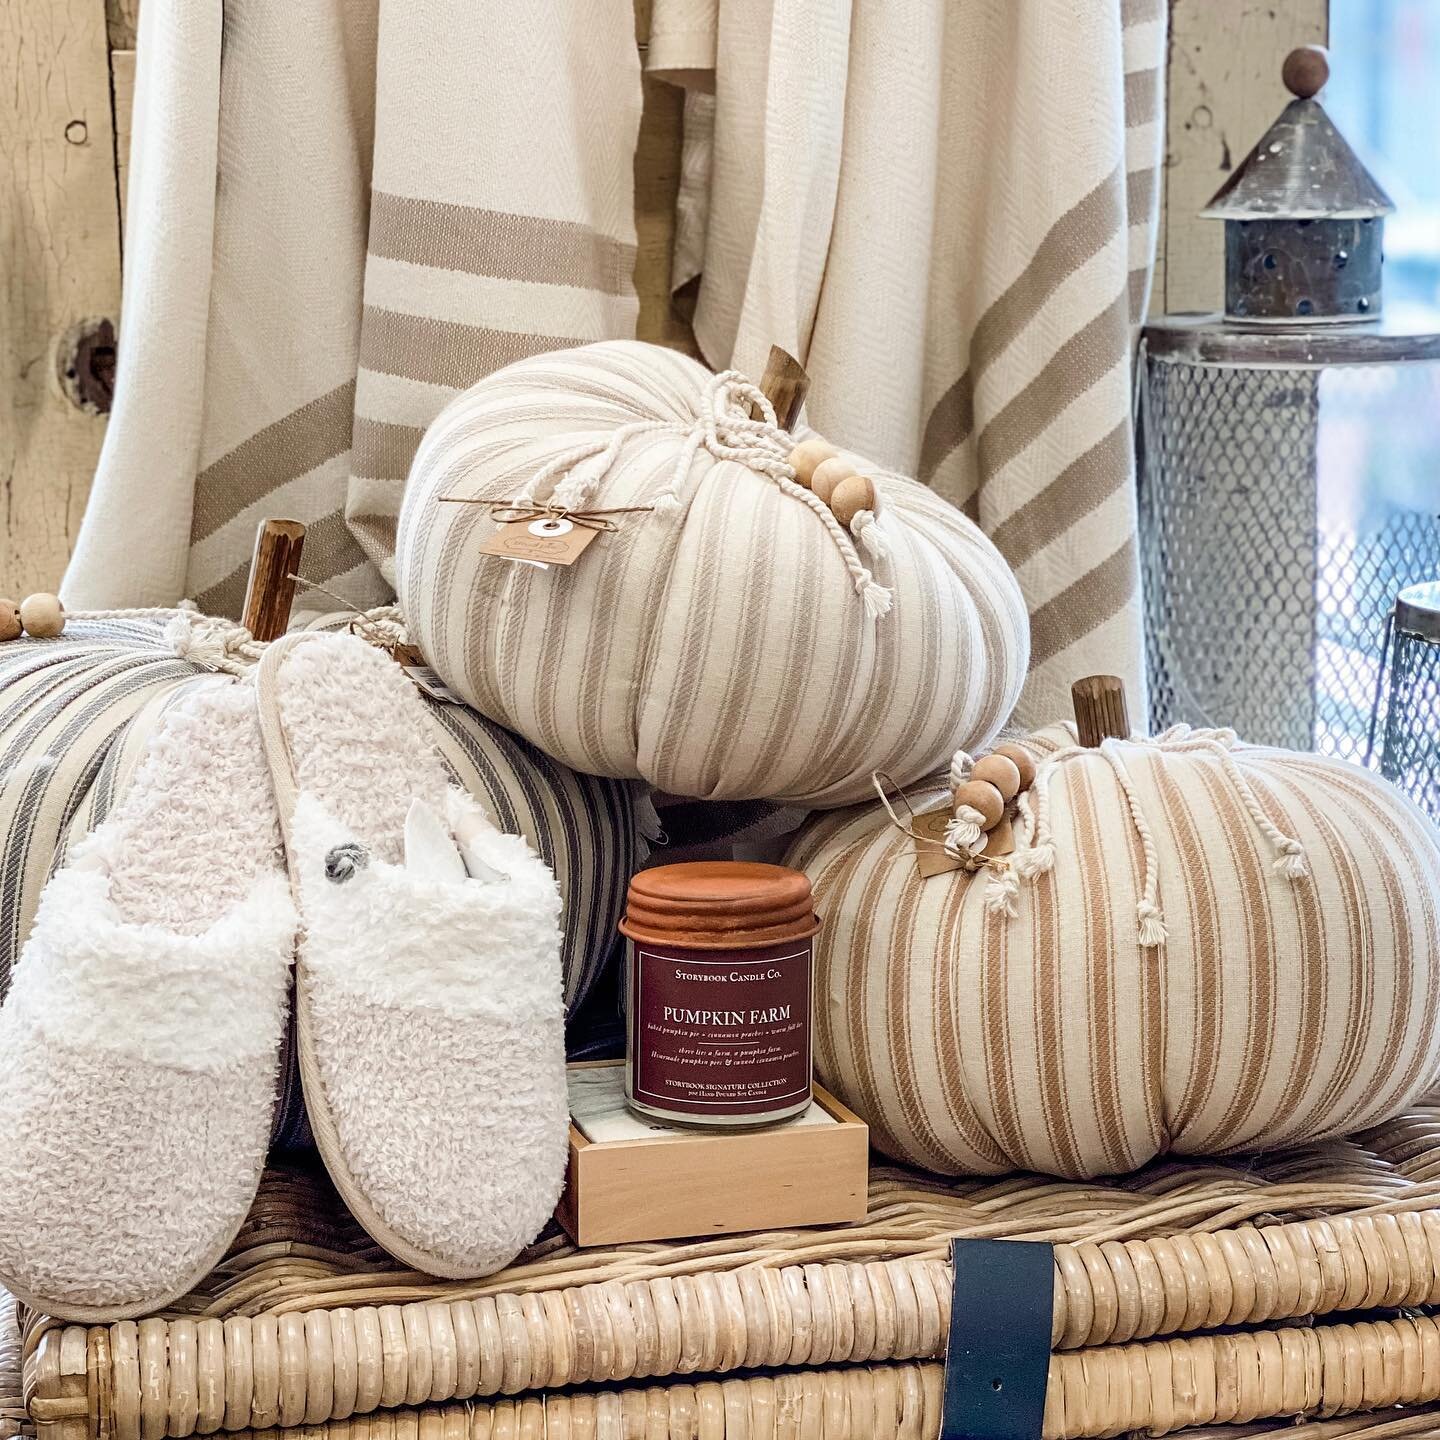 We think these are the perfect little pumpkins for your fall decor 🍁